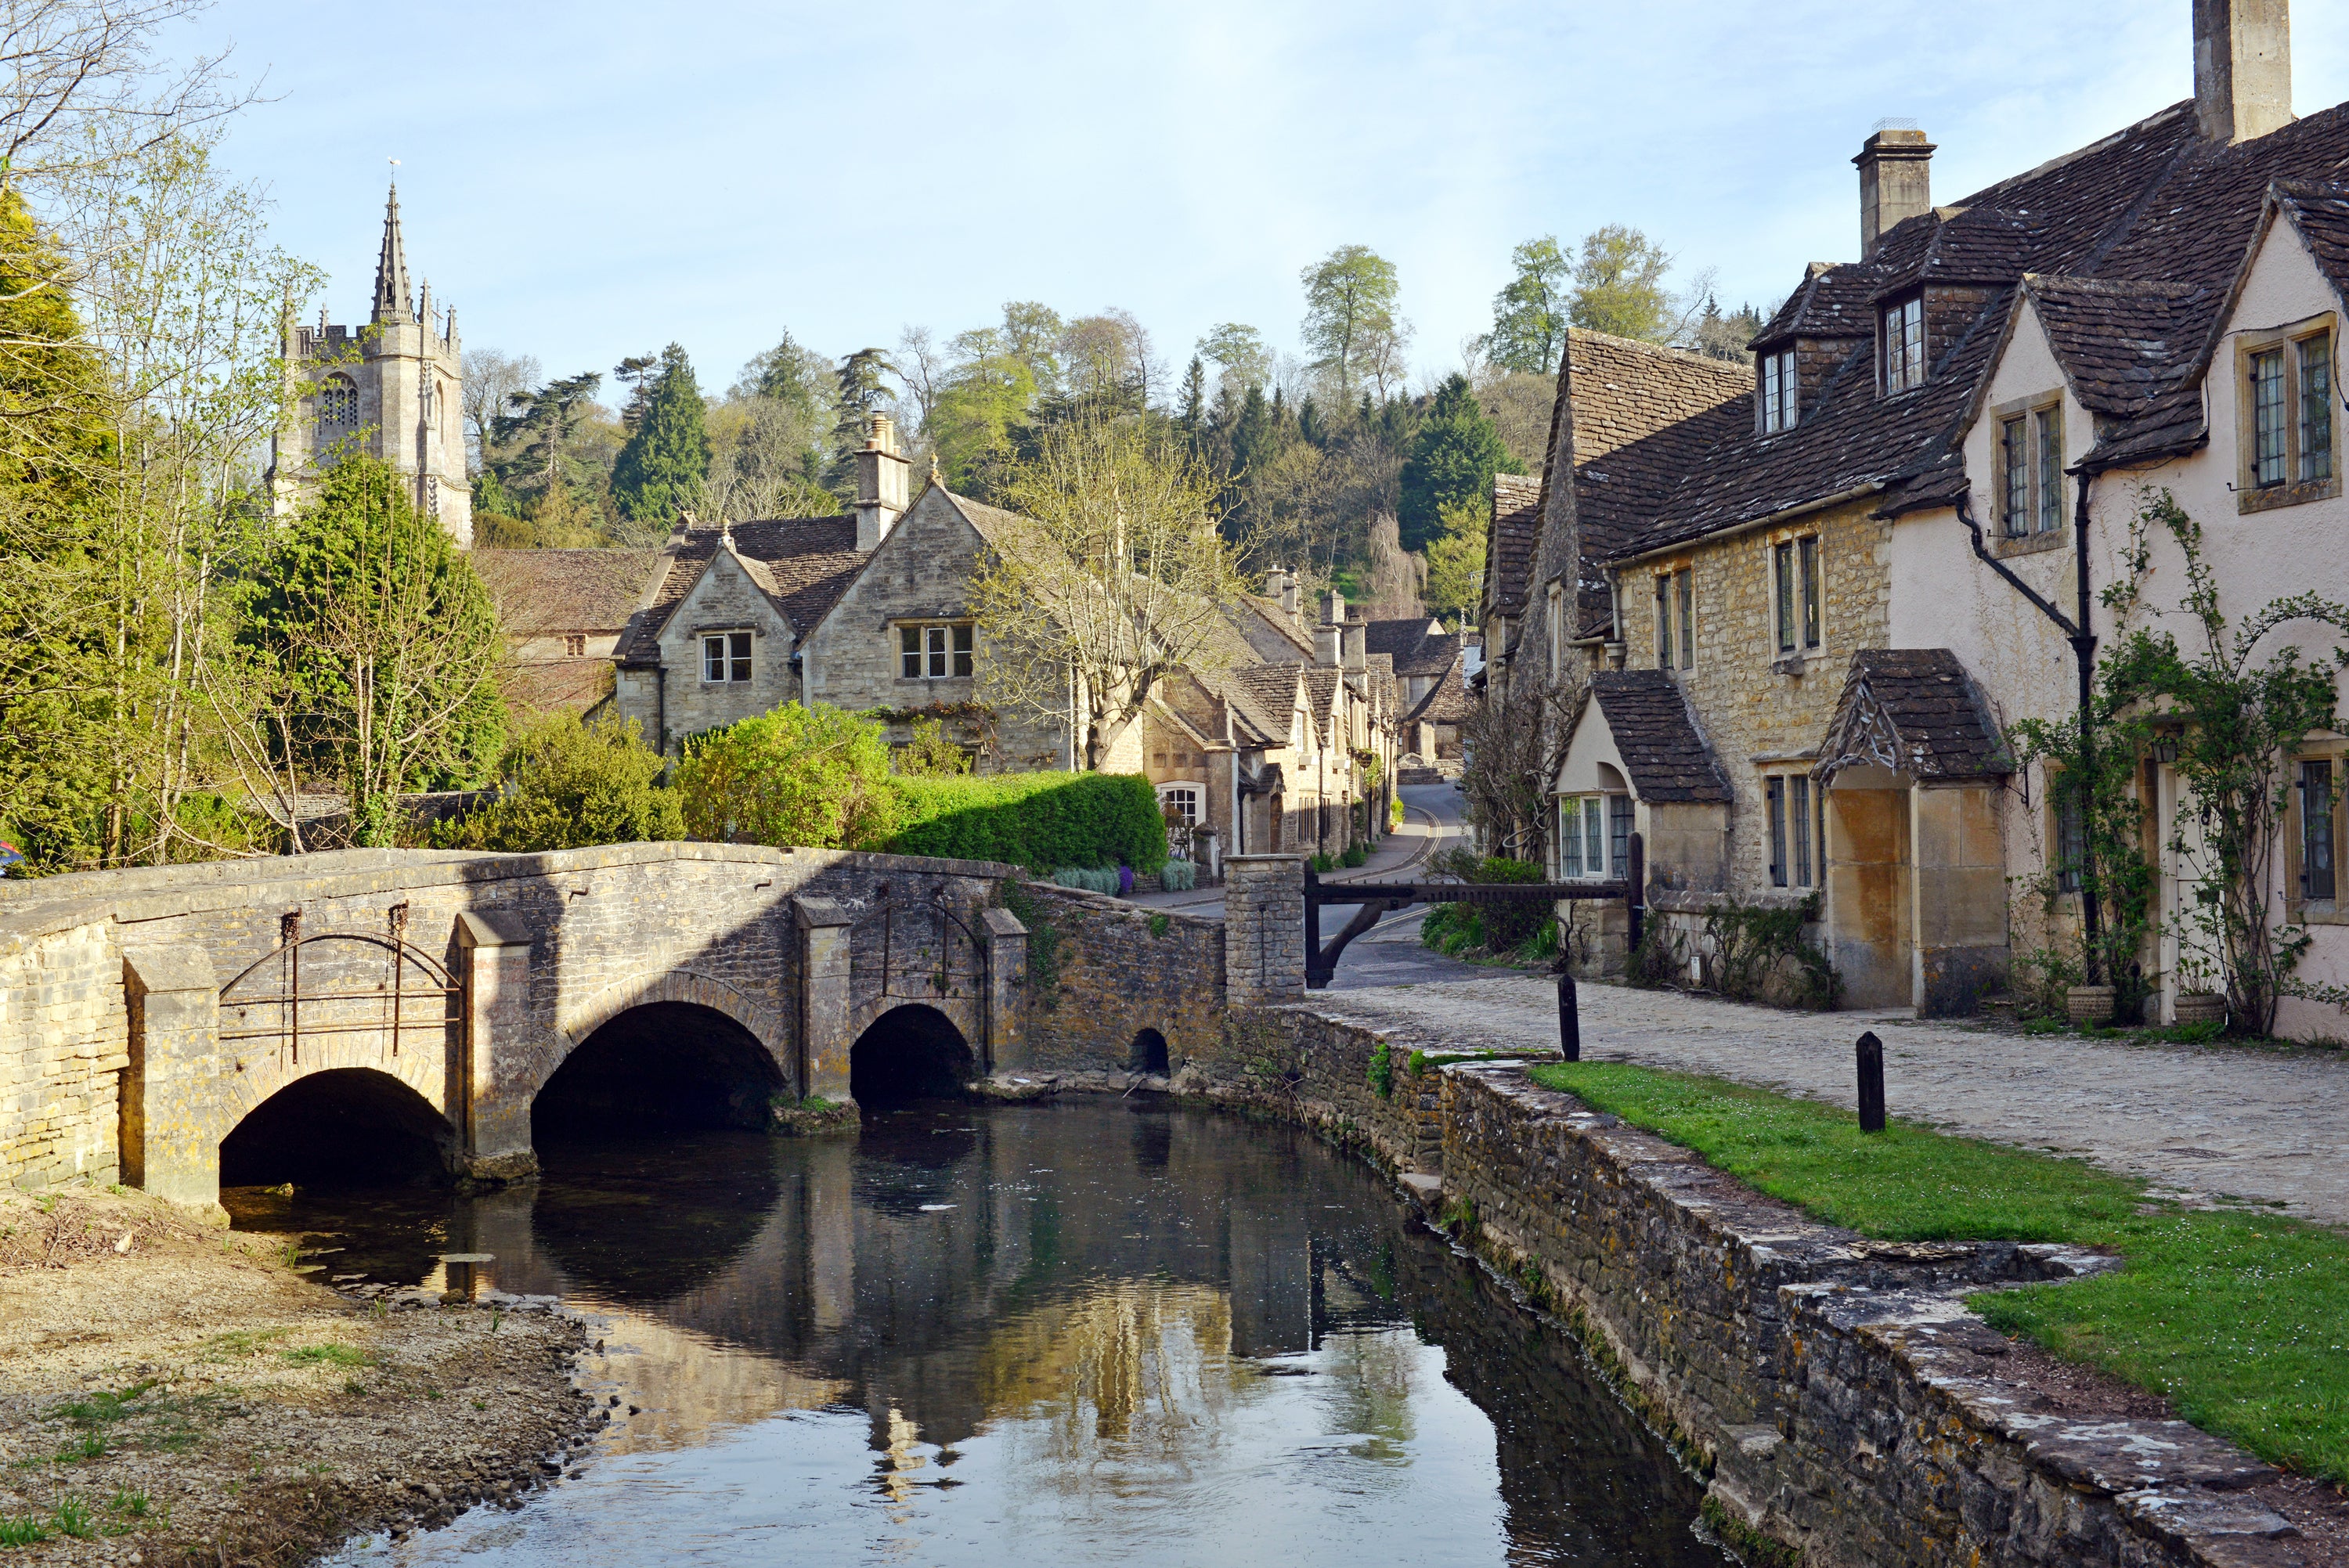 There are plenty of small, independent places to stay in The Cotswolds